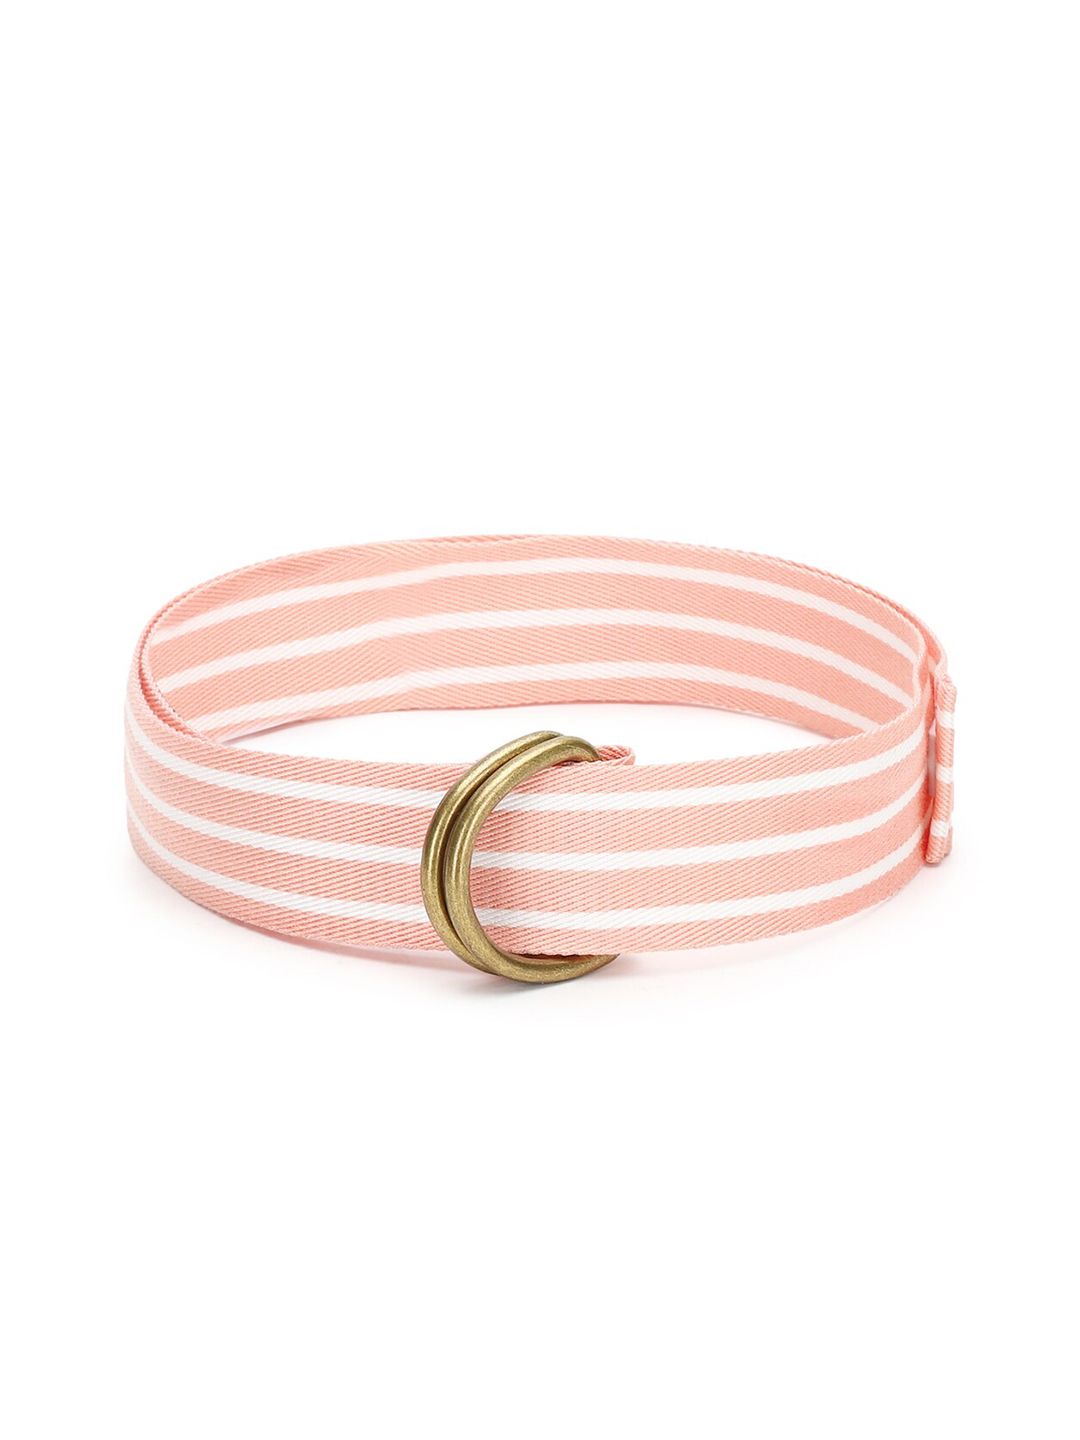 AMERICAN EAGLE OUTFITTERS Women Pink Striped Belt Price in India